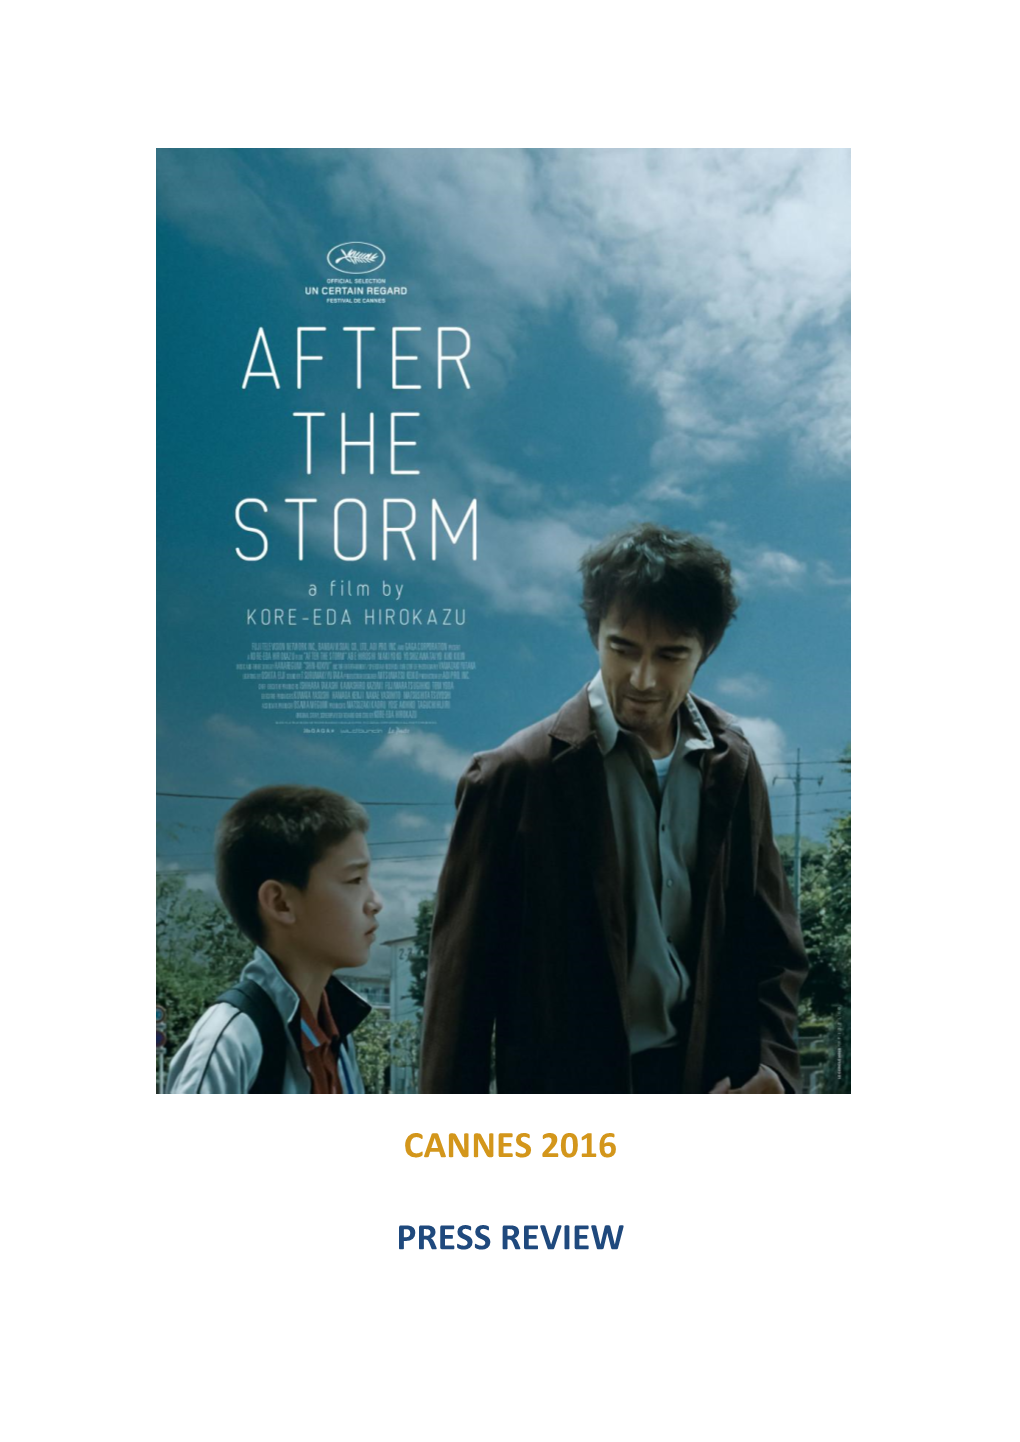 Cannes 2016 Press Review